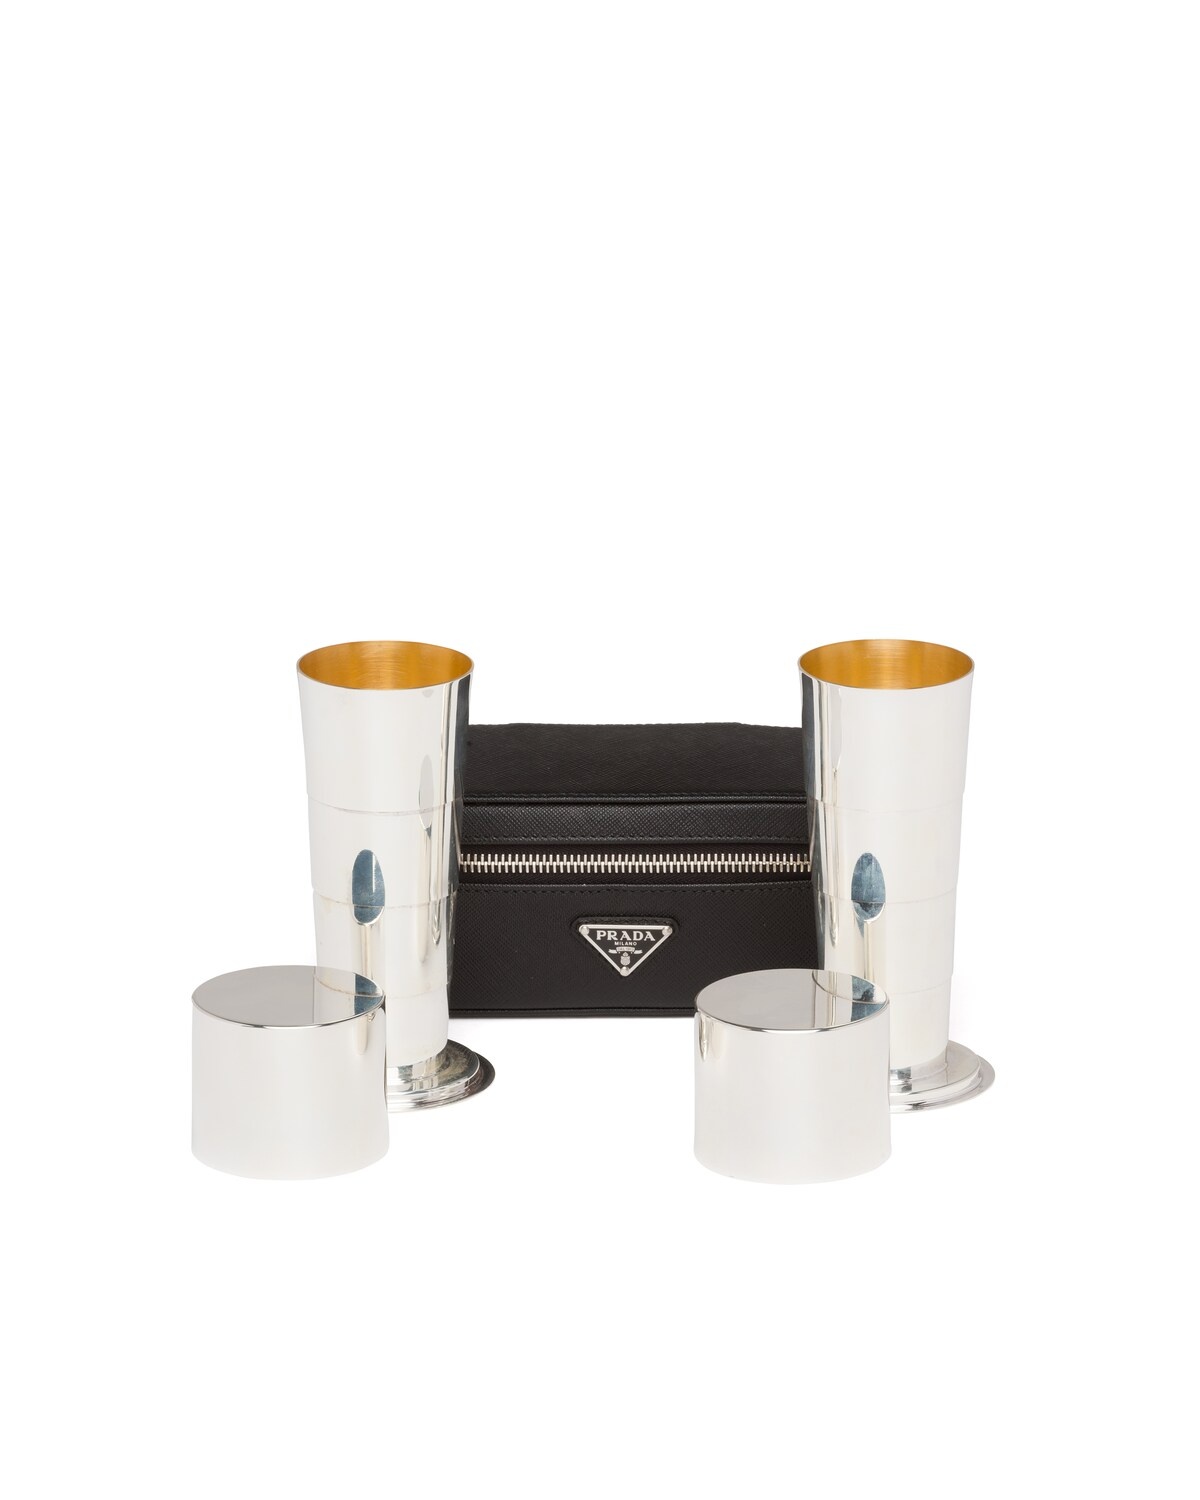 Sterling silver cup set - 1